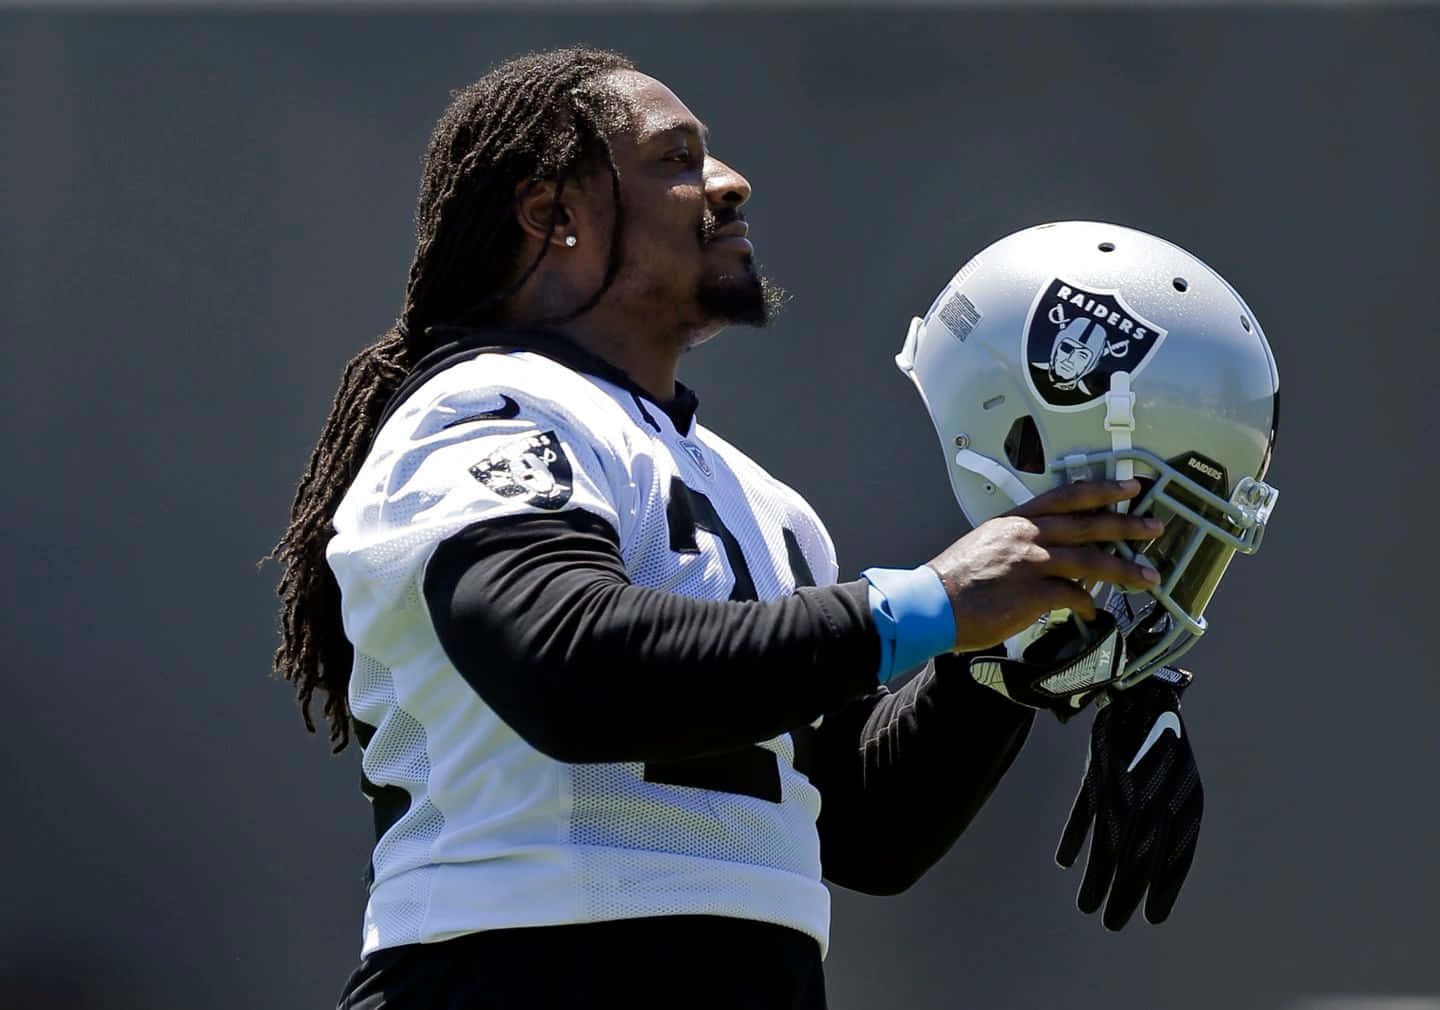 A Football Player With Dreadlocks Is Holding A Helmet